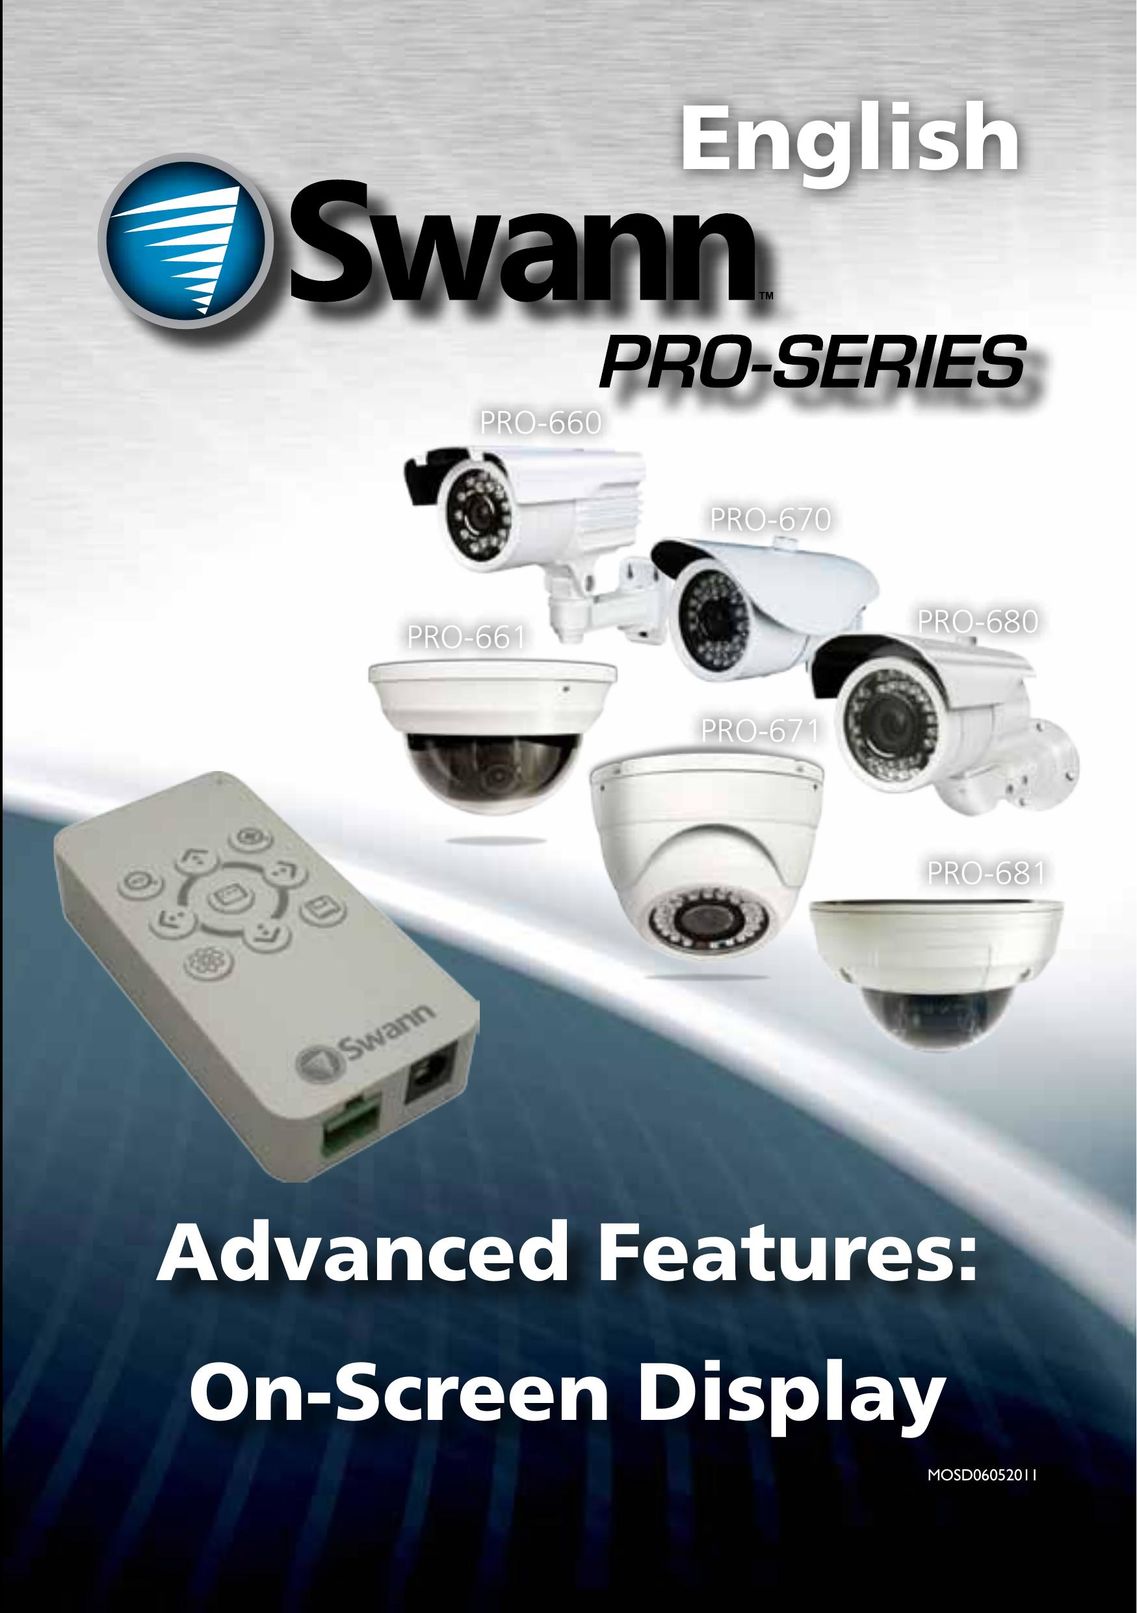 Swann PRO-660 Home Security System User Manual